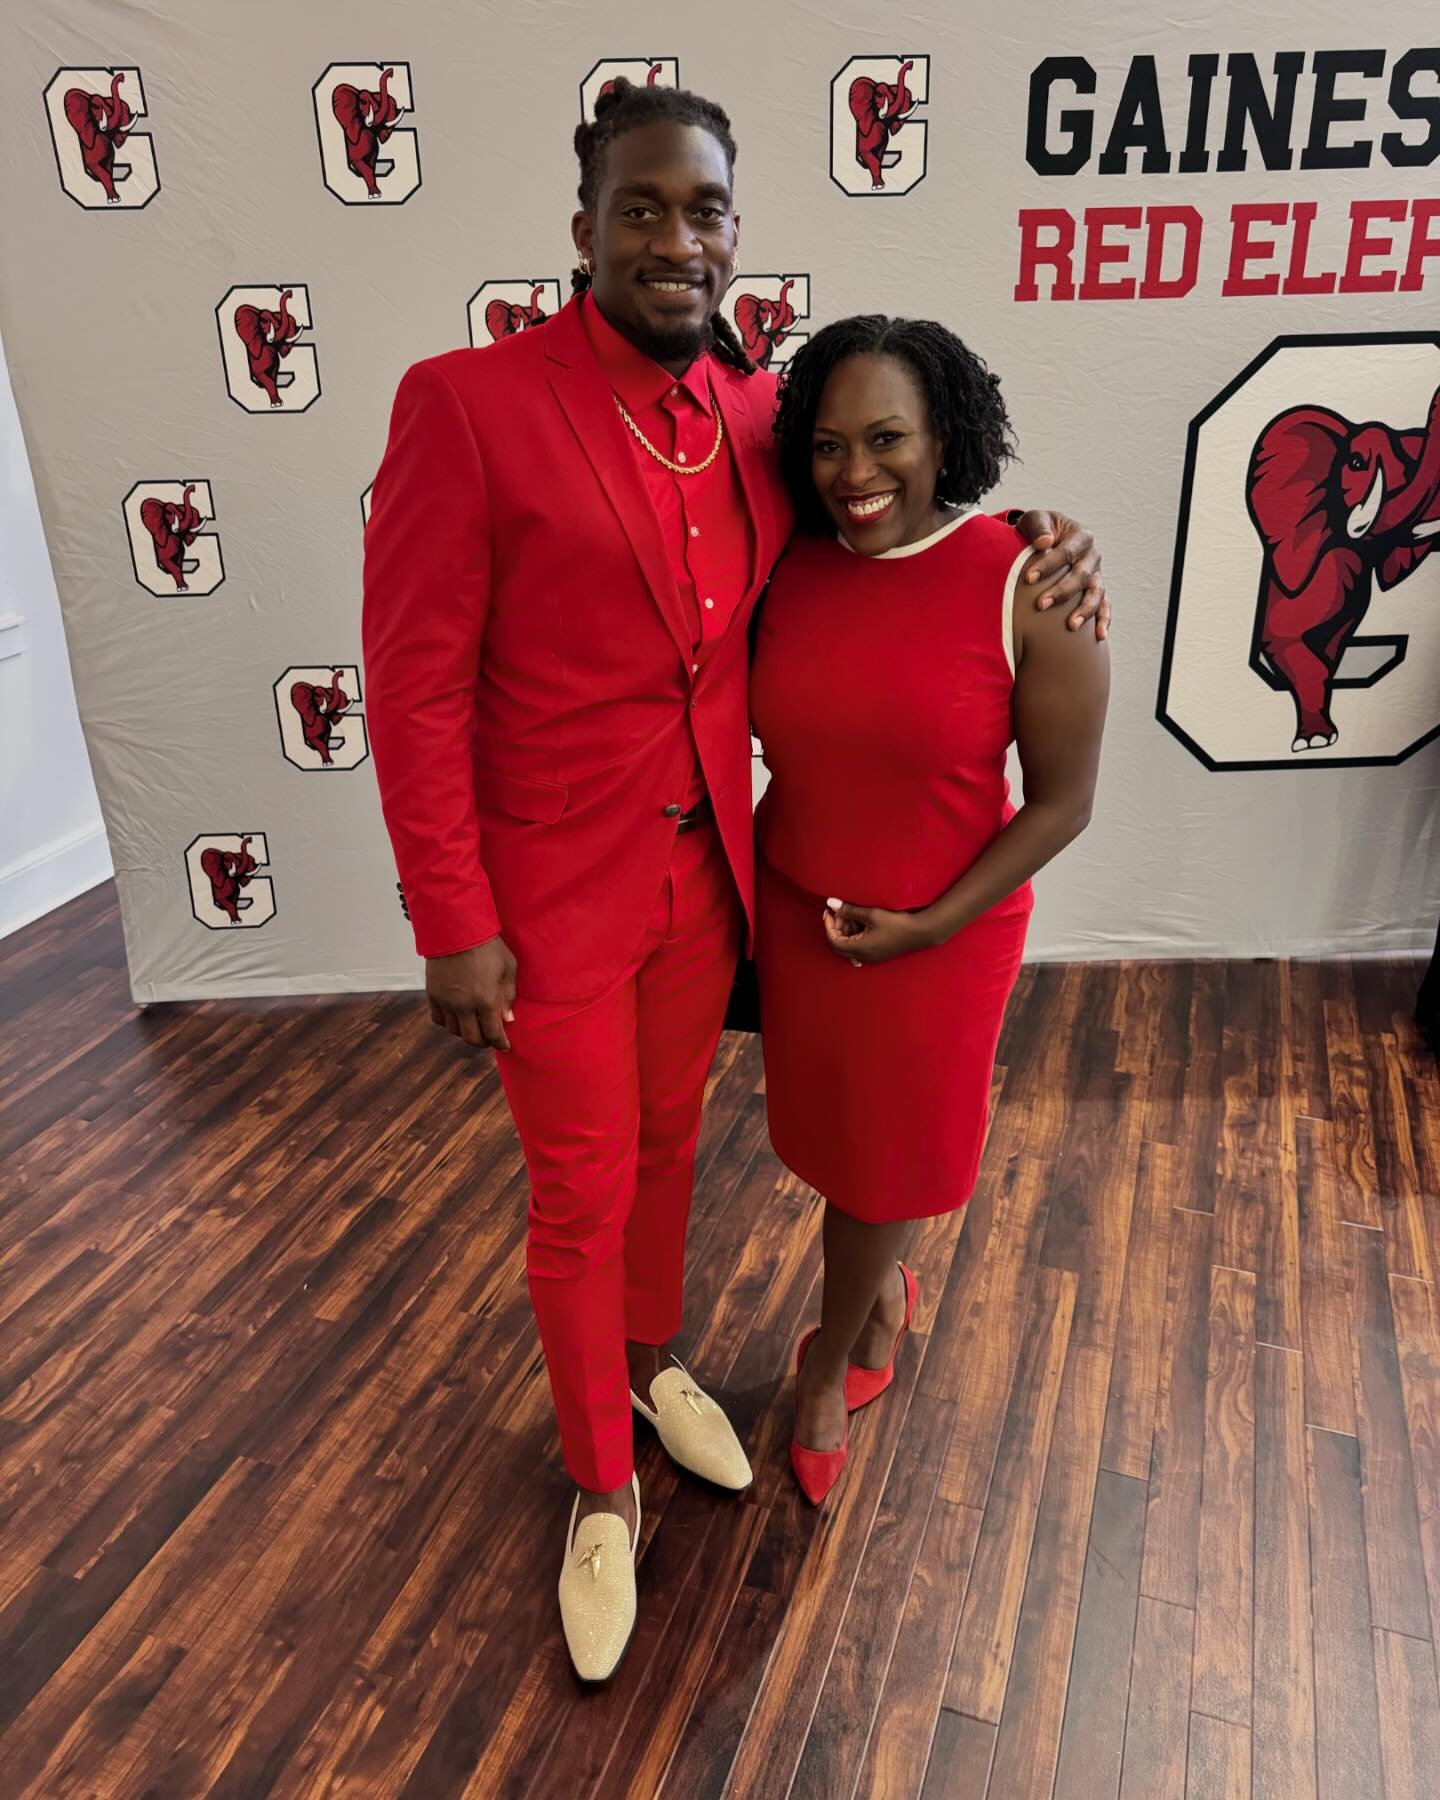 Congratulations to my cousin, Alexander (AJ) Johnson! Last night he was inducted into the Gainesville High School Hall of Fame, surrounded by his family and friends. I&rsquo;m proud of the man he is and I can&rsquo;t wait to see the rest of the journ